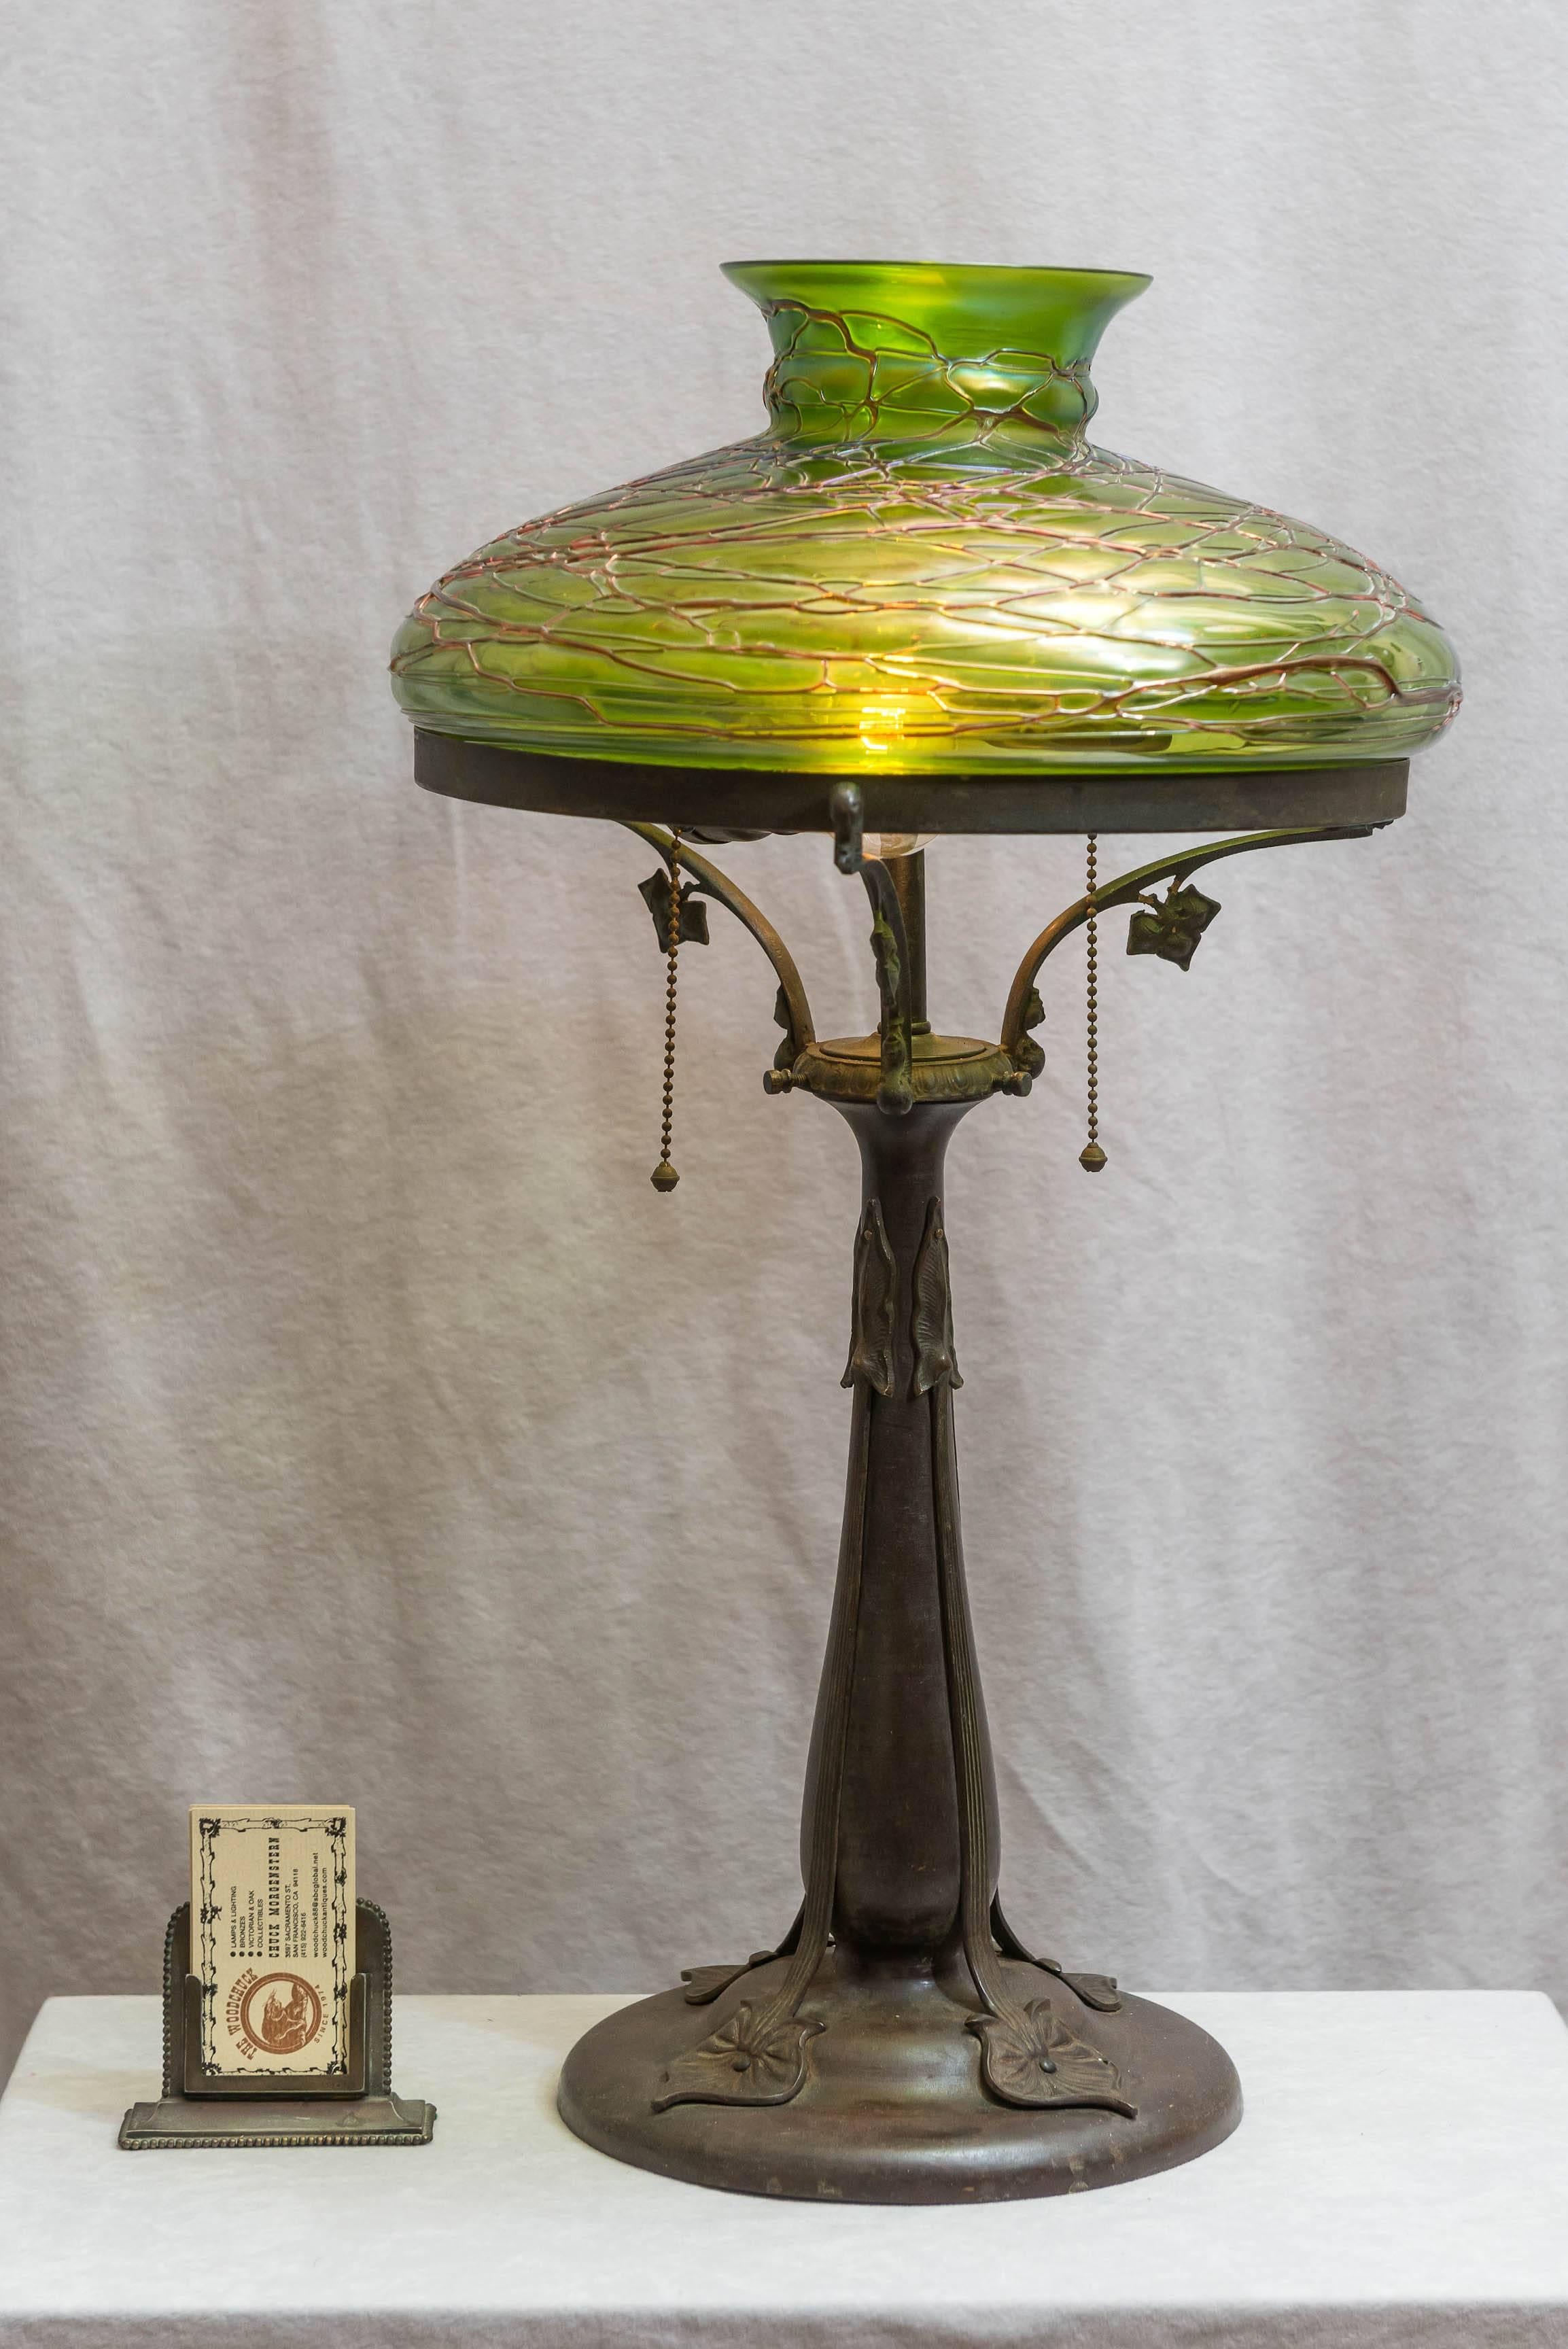 Very attractive Art Nouveau lamp with a handblown shade possibly executed by Loetz. The photos tell the story.